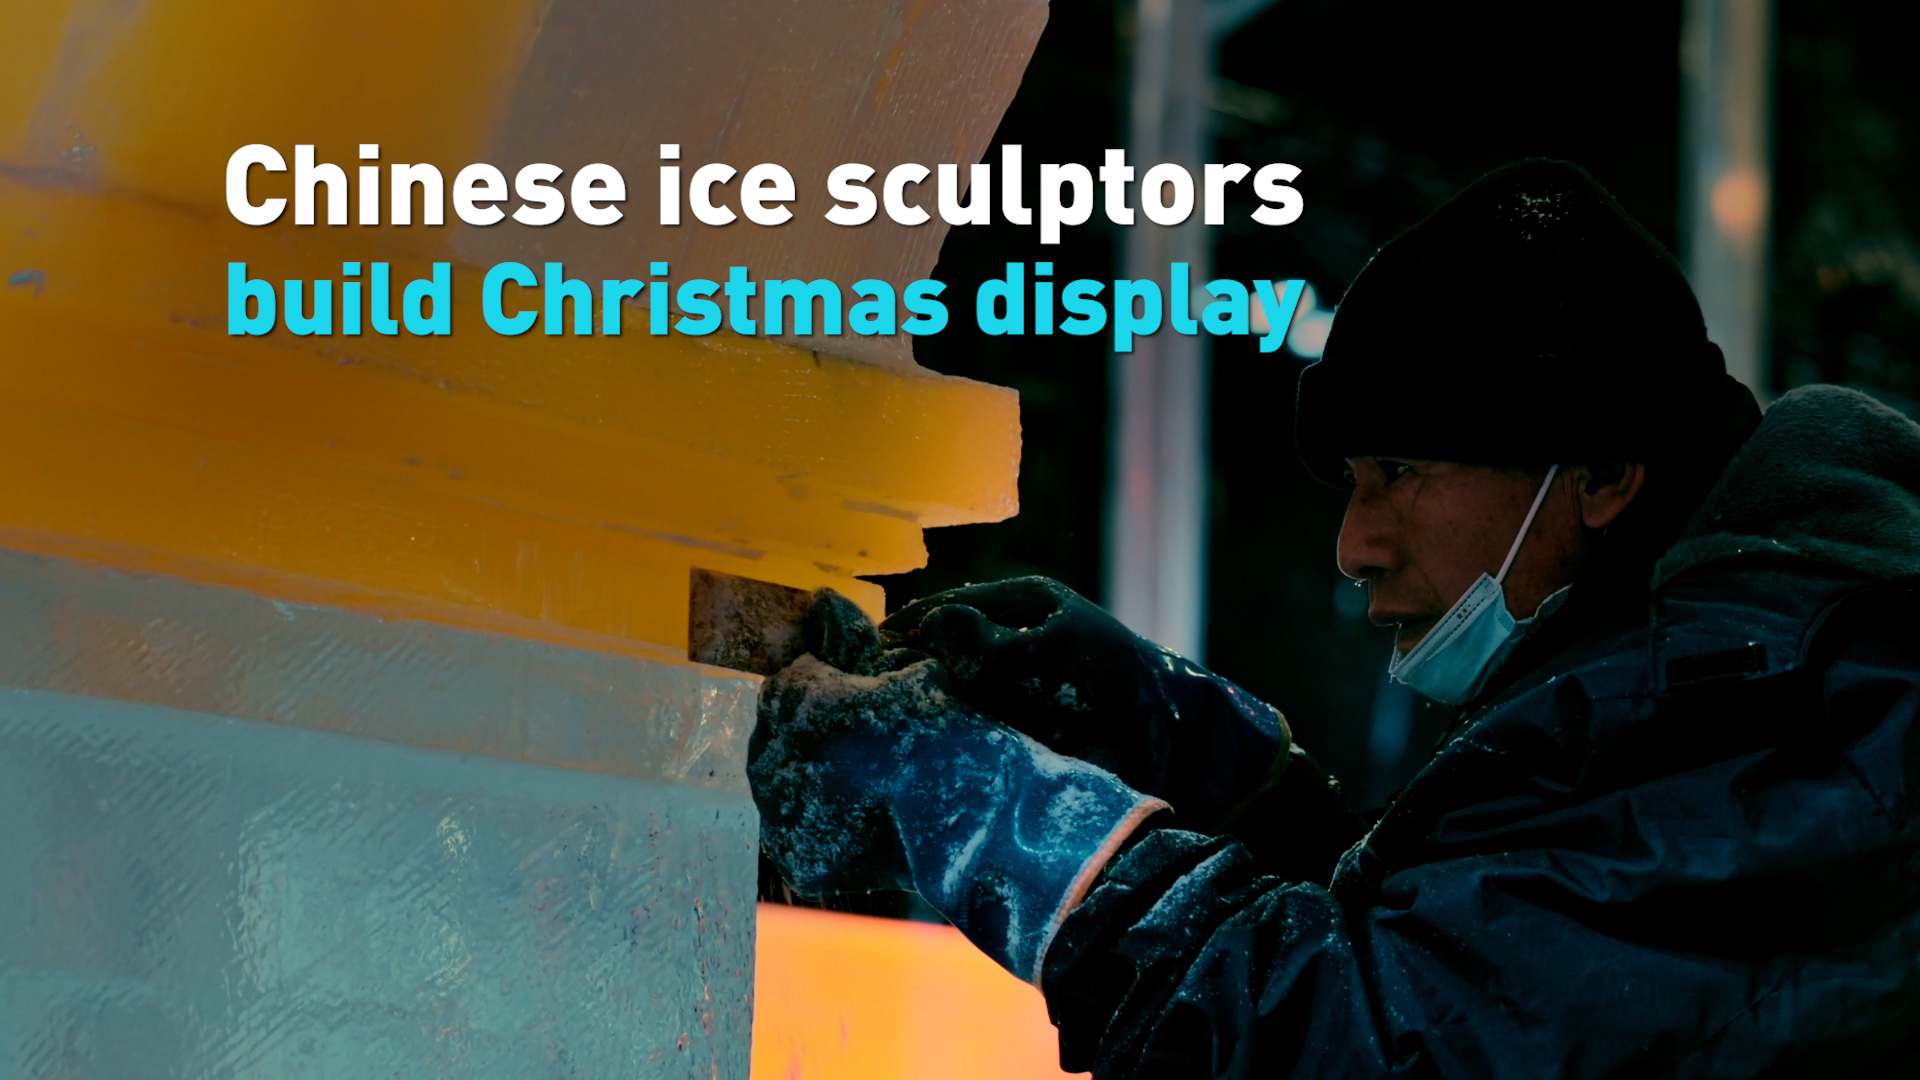 Chinese ice sculptors build Christmas display